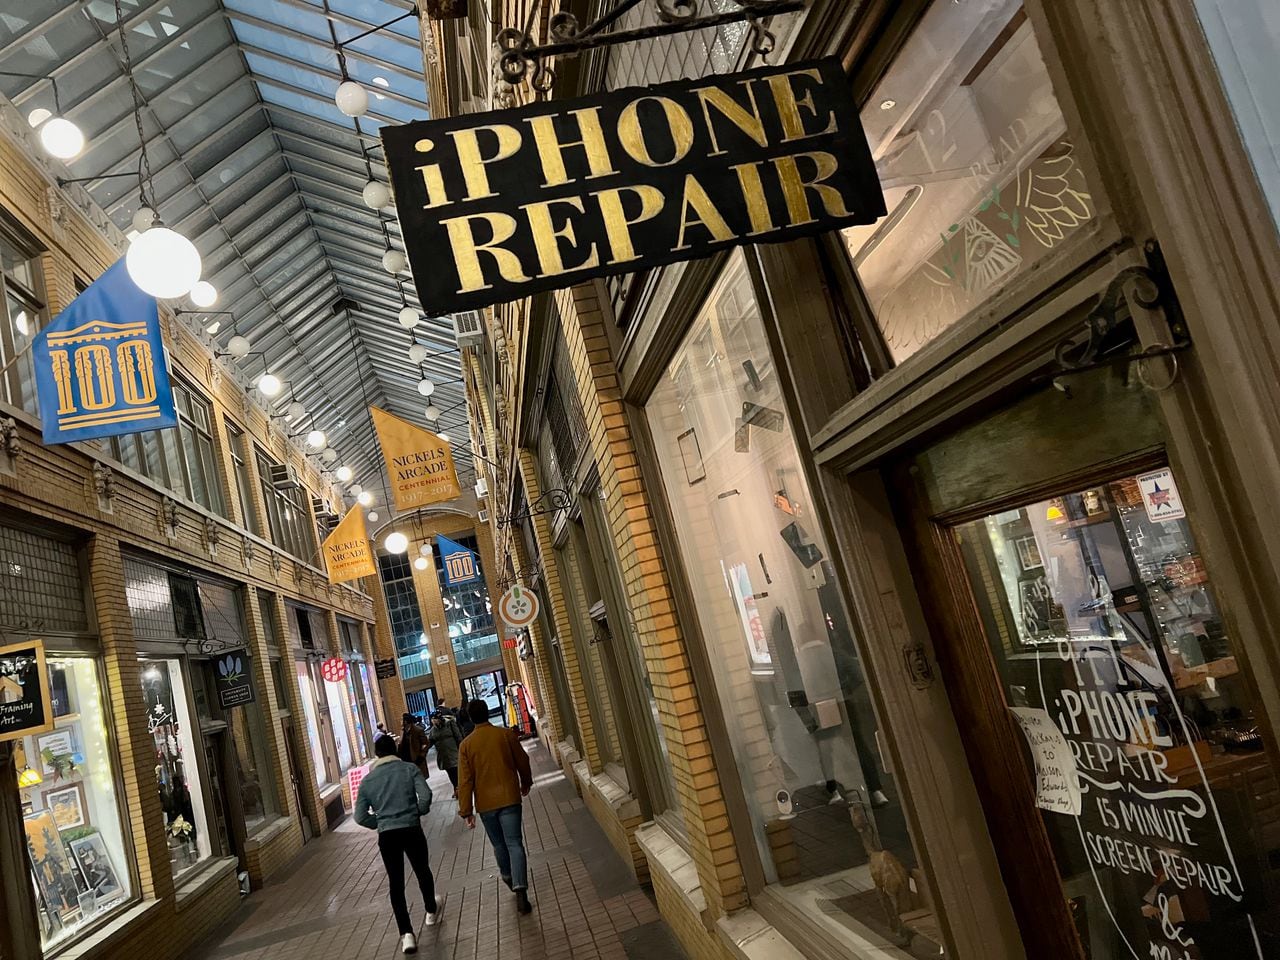 Oregon passes expansive right-to-repair law, defying tech industry concerns